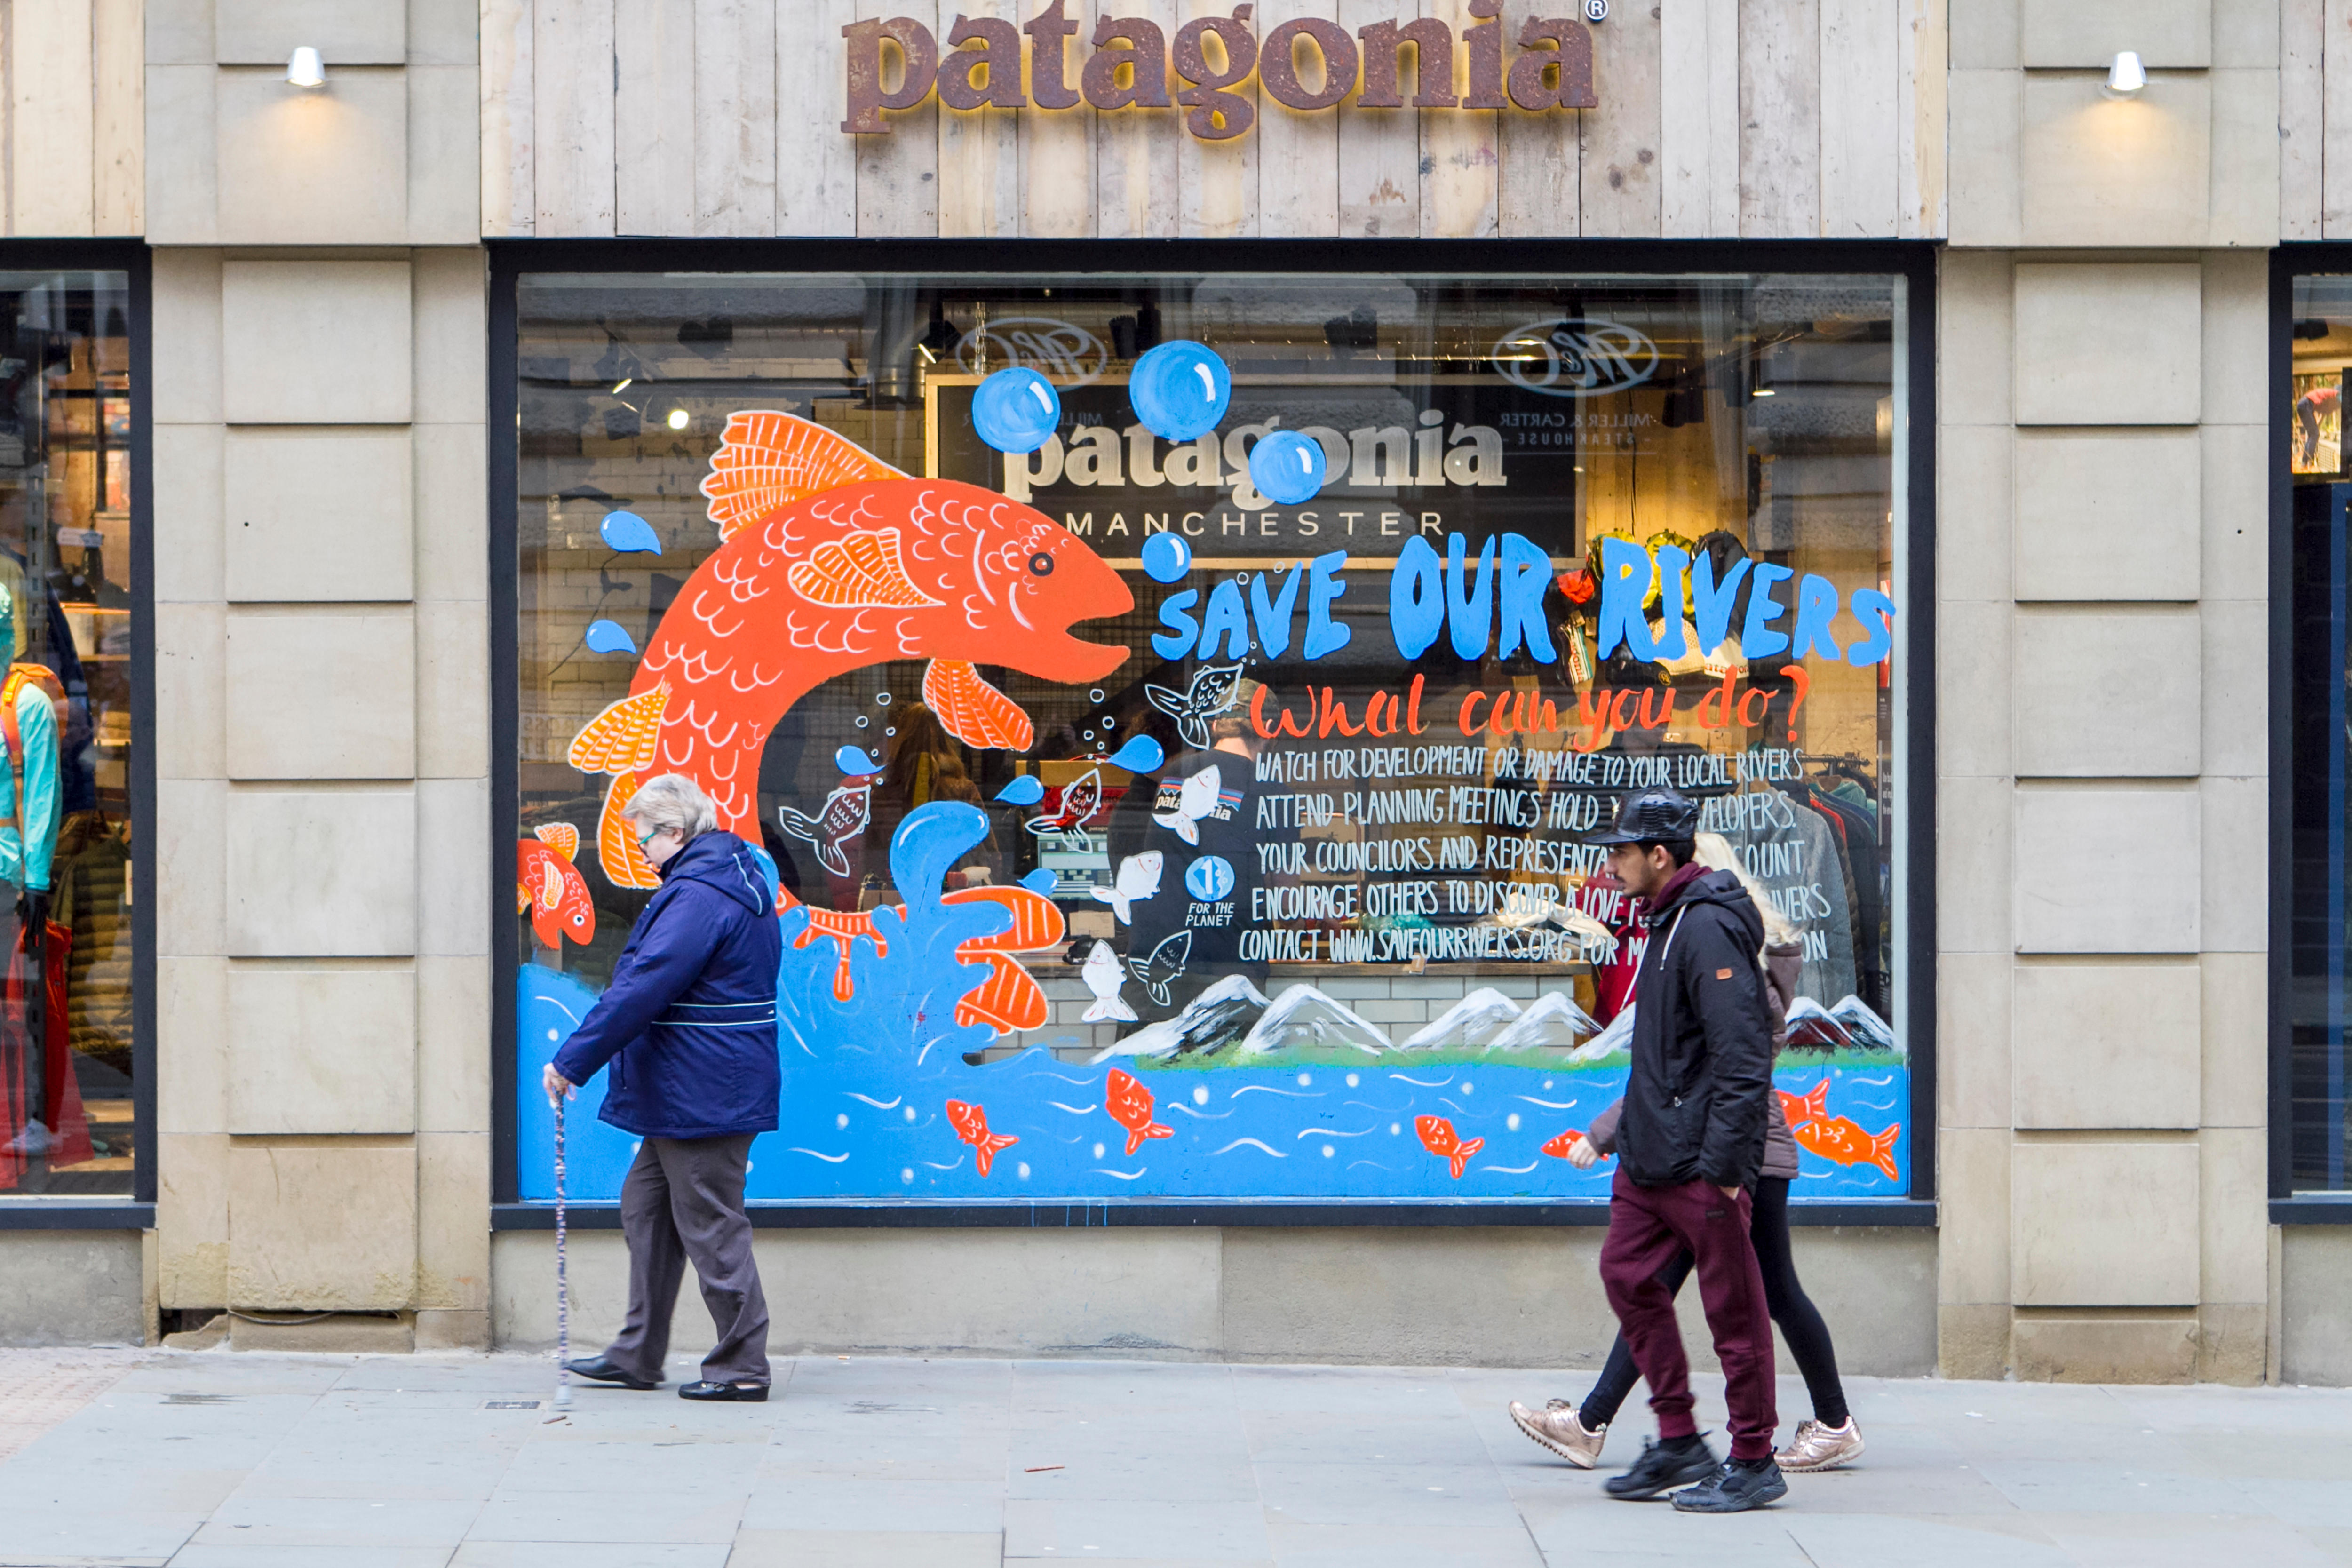 A Patagonia store.